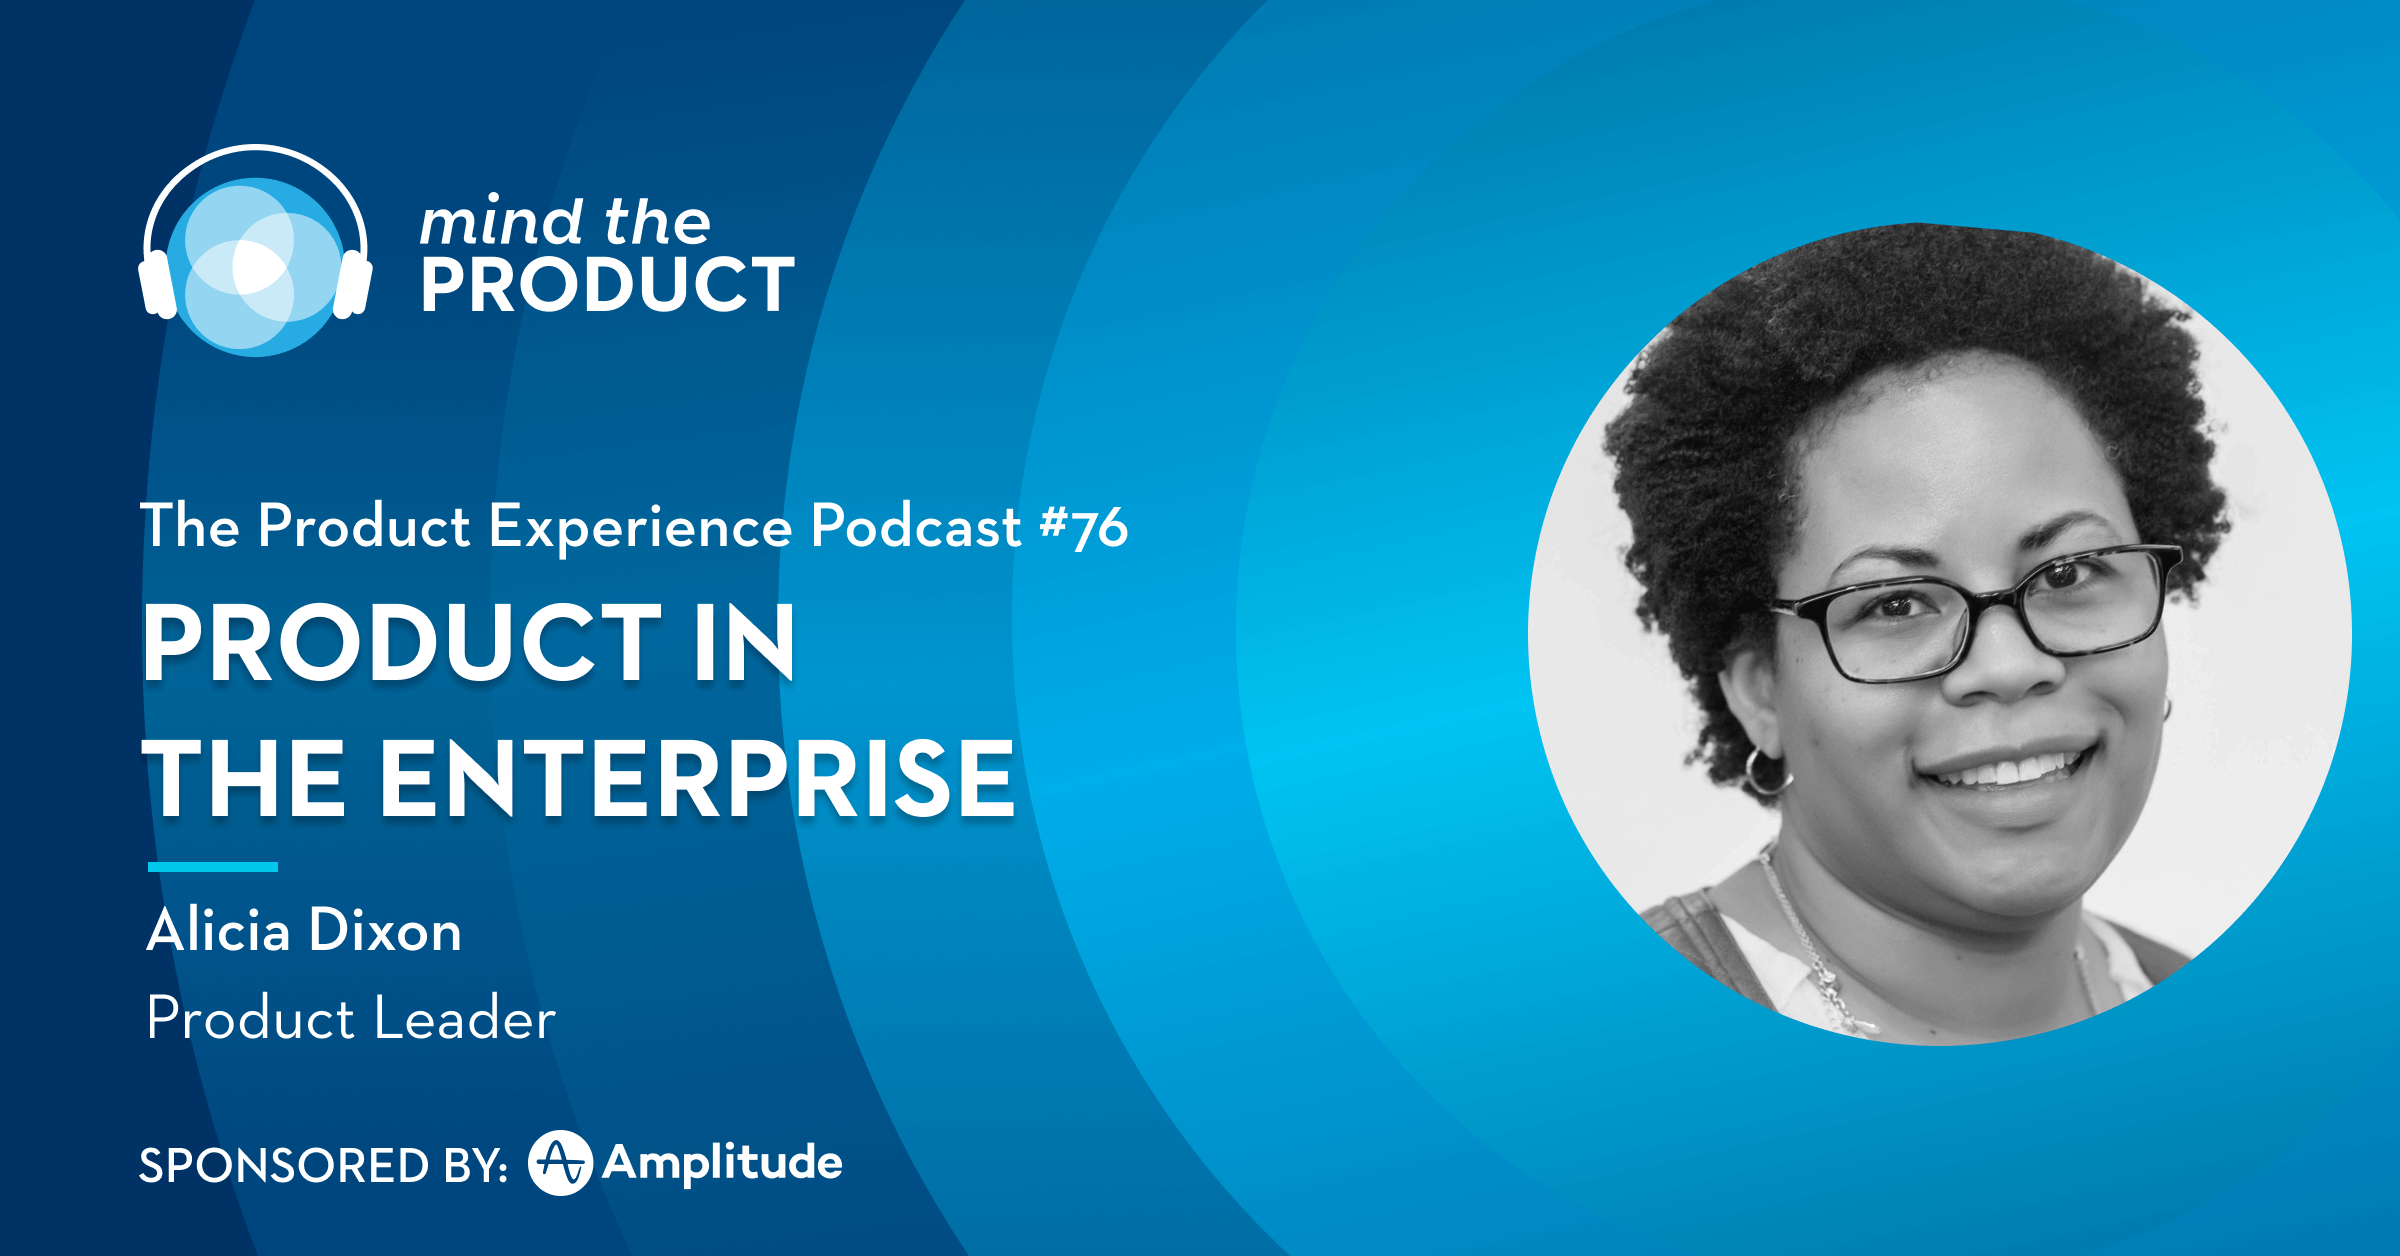 Alicia Dixon on The Product Experience